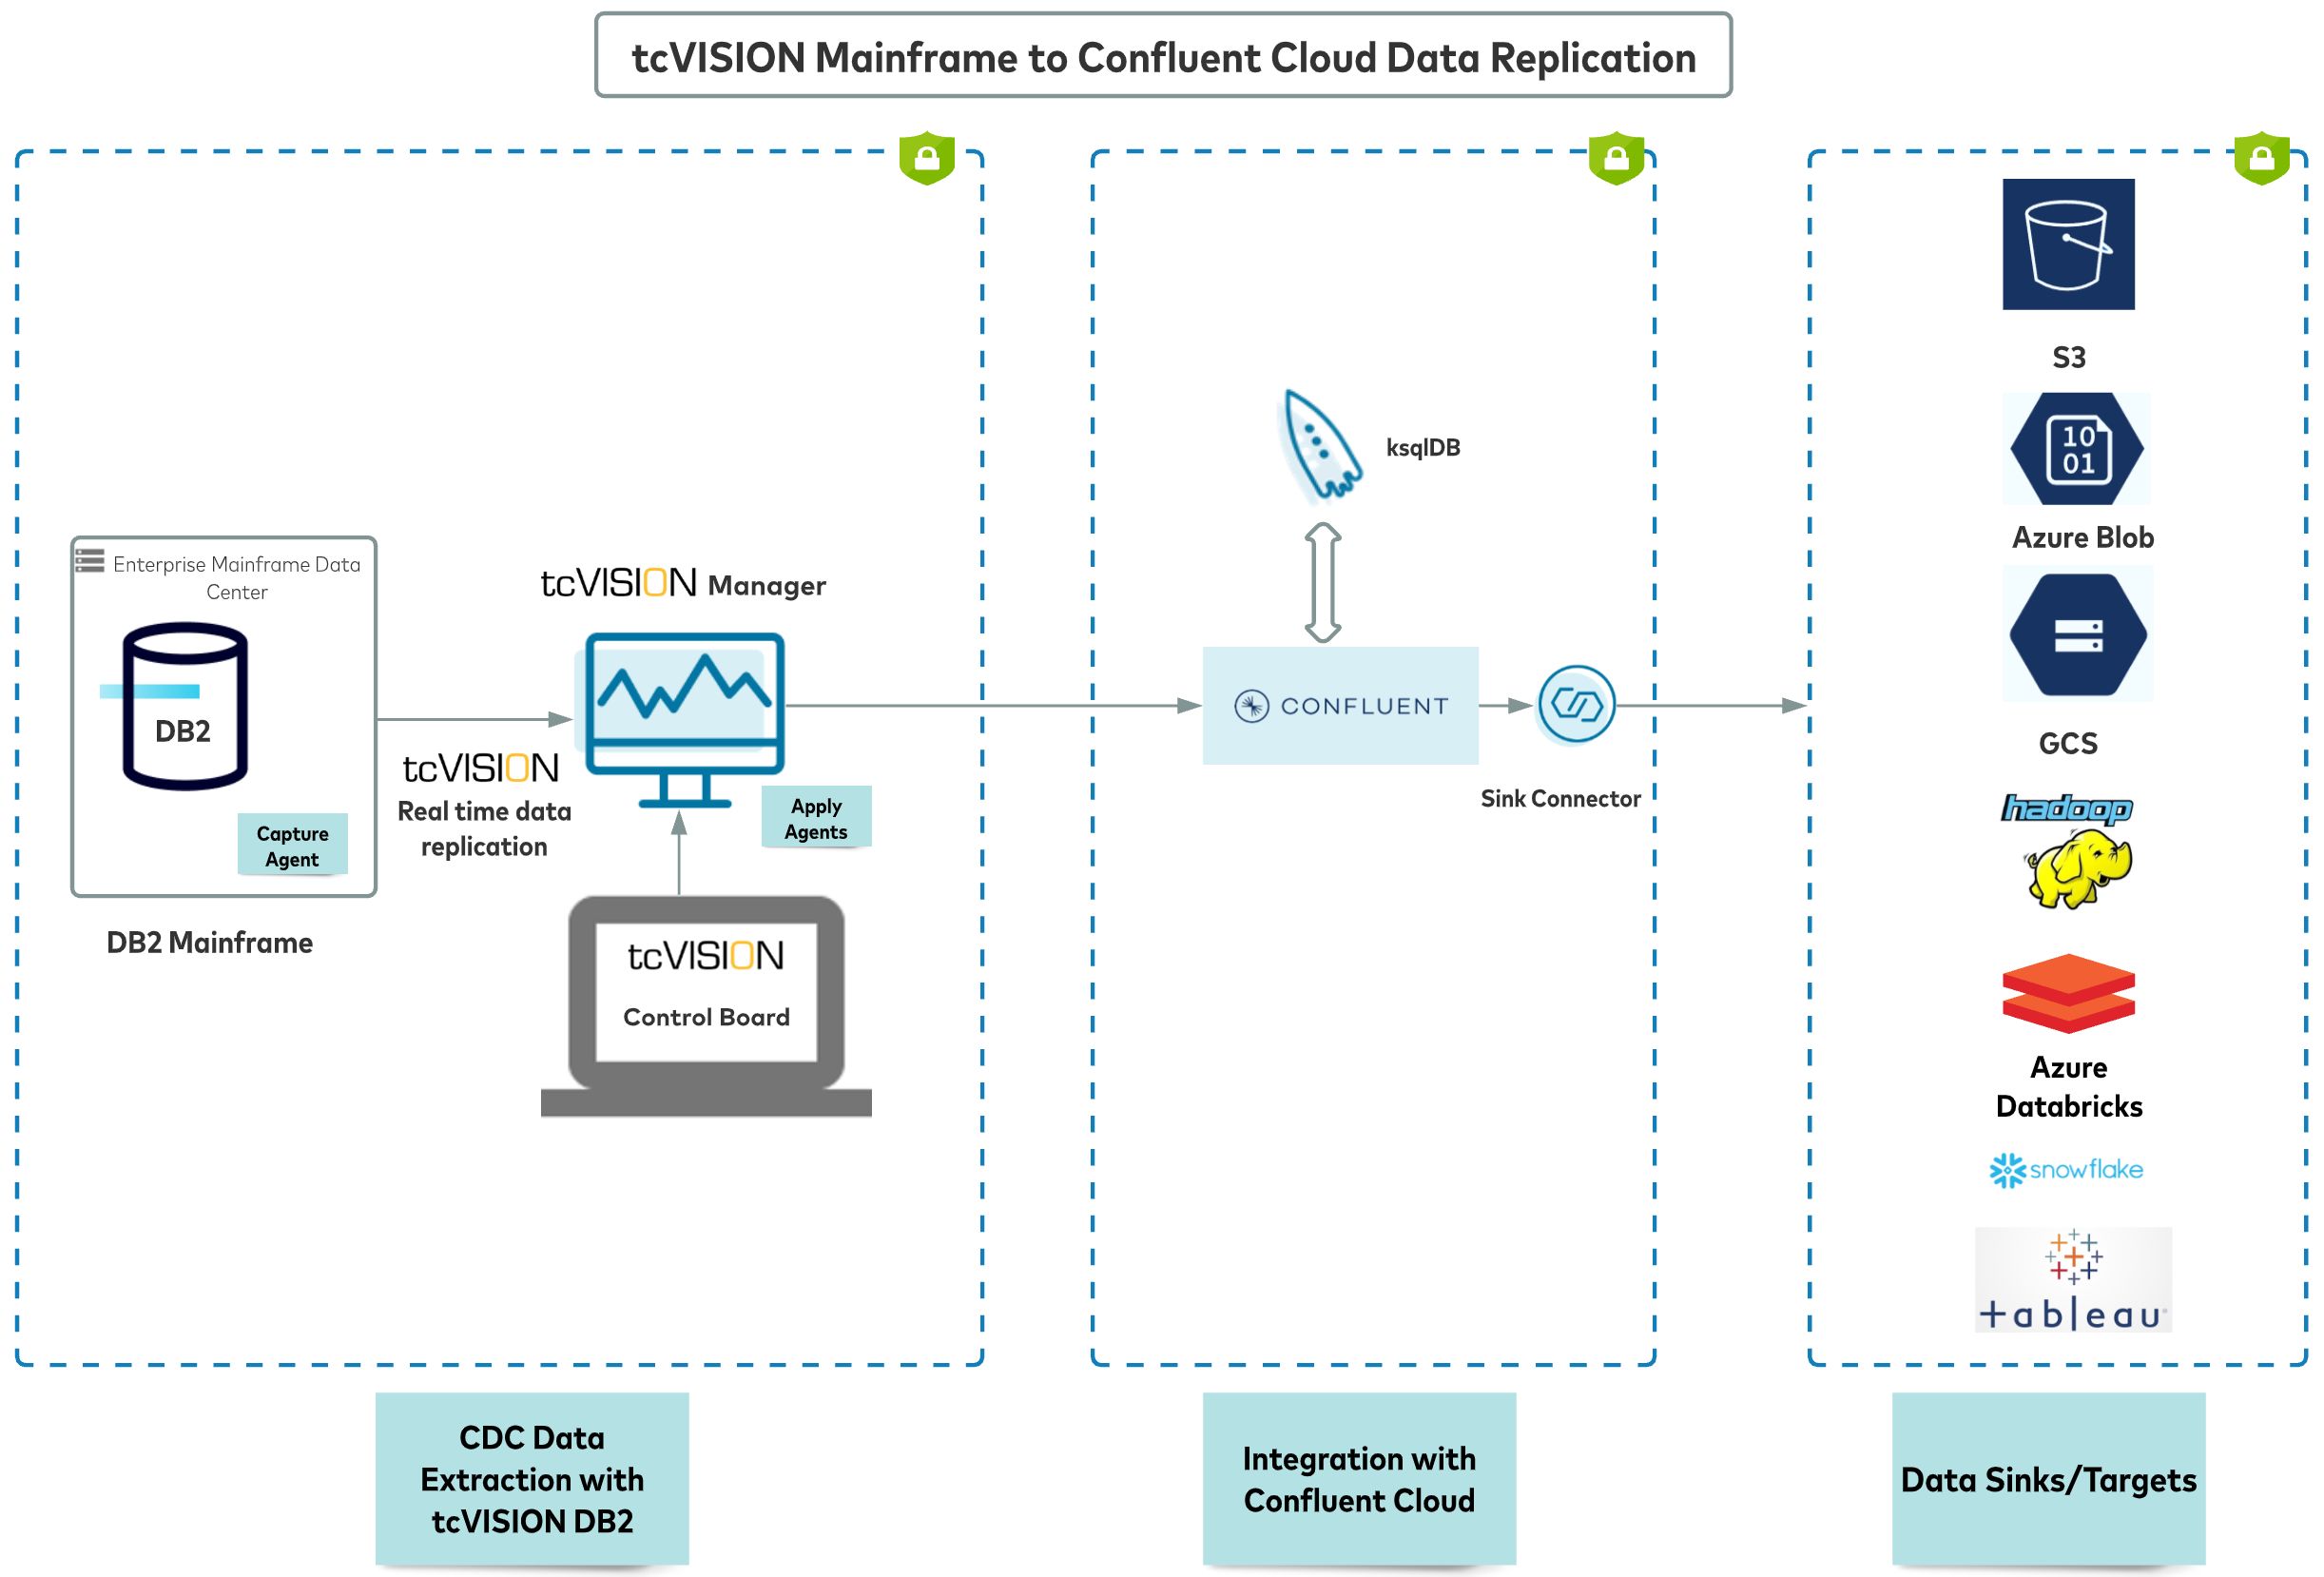 tcVISION Mainframe to Confluent Cloud Data Replication